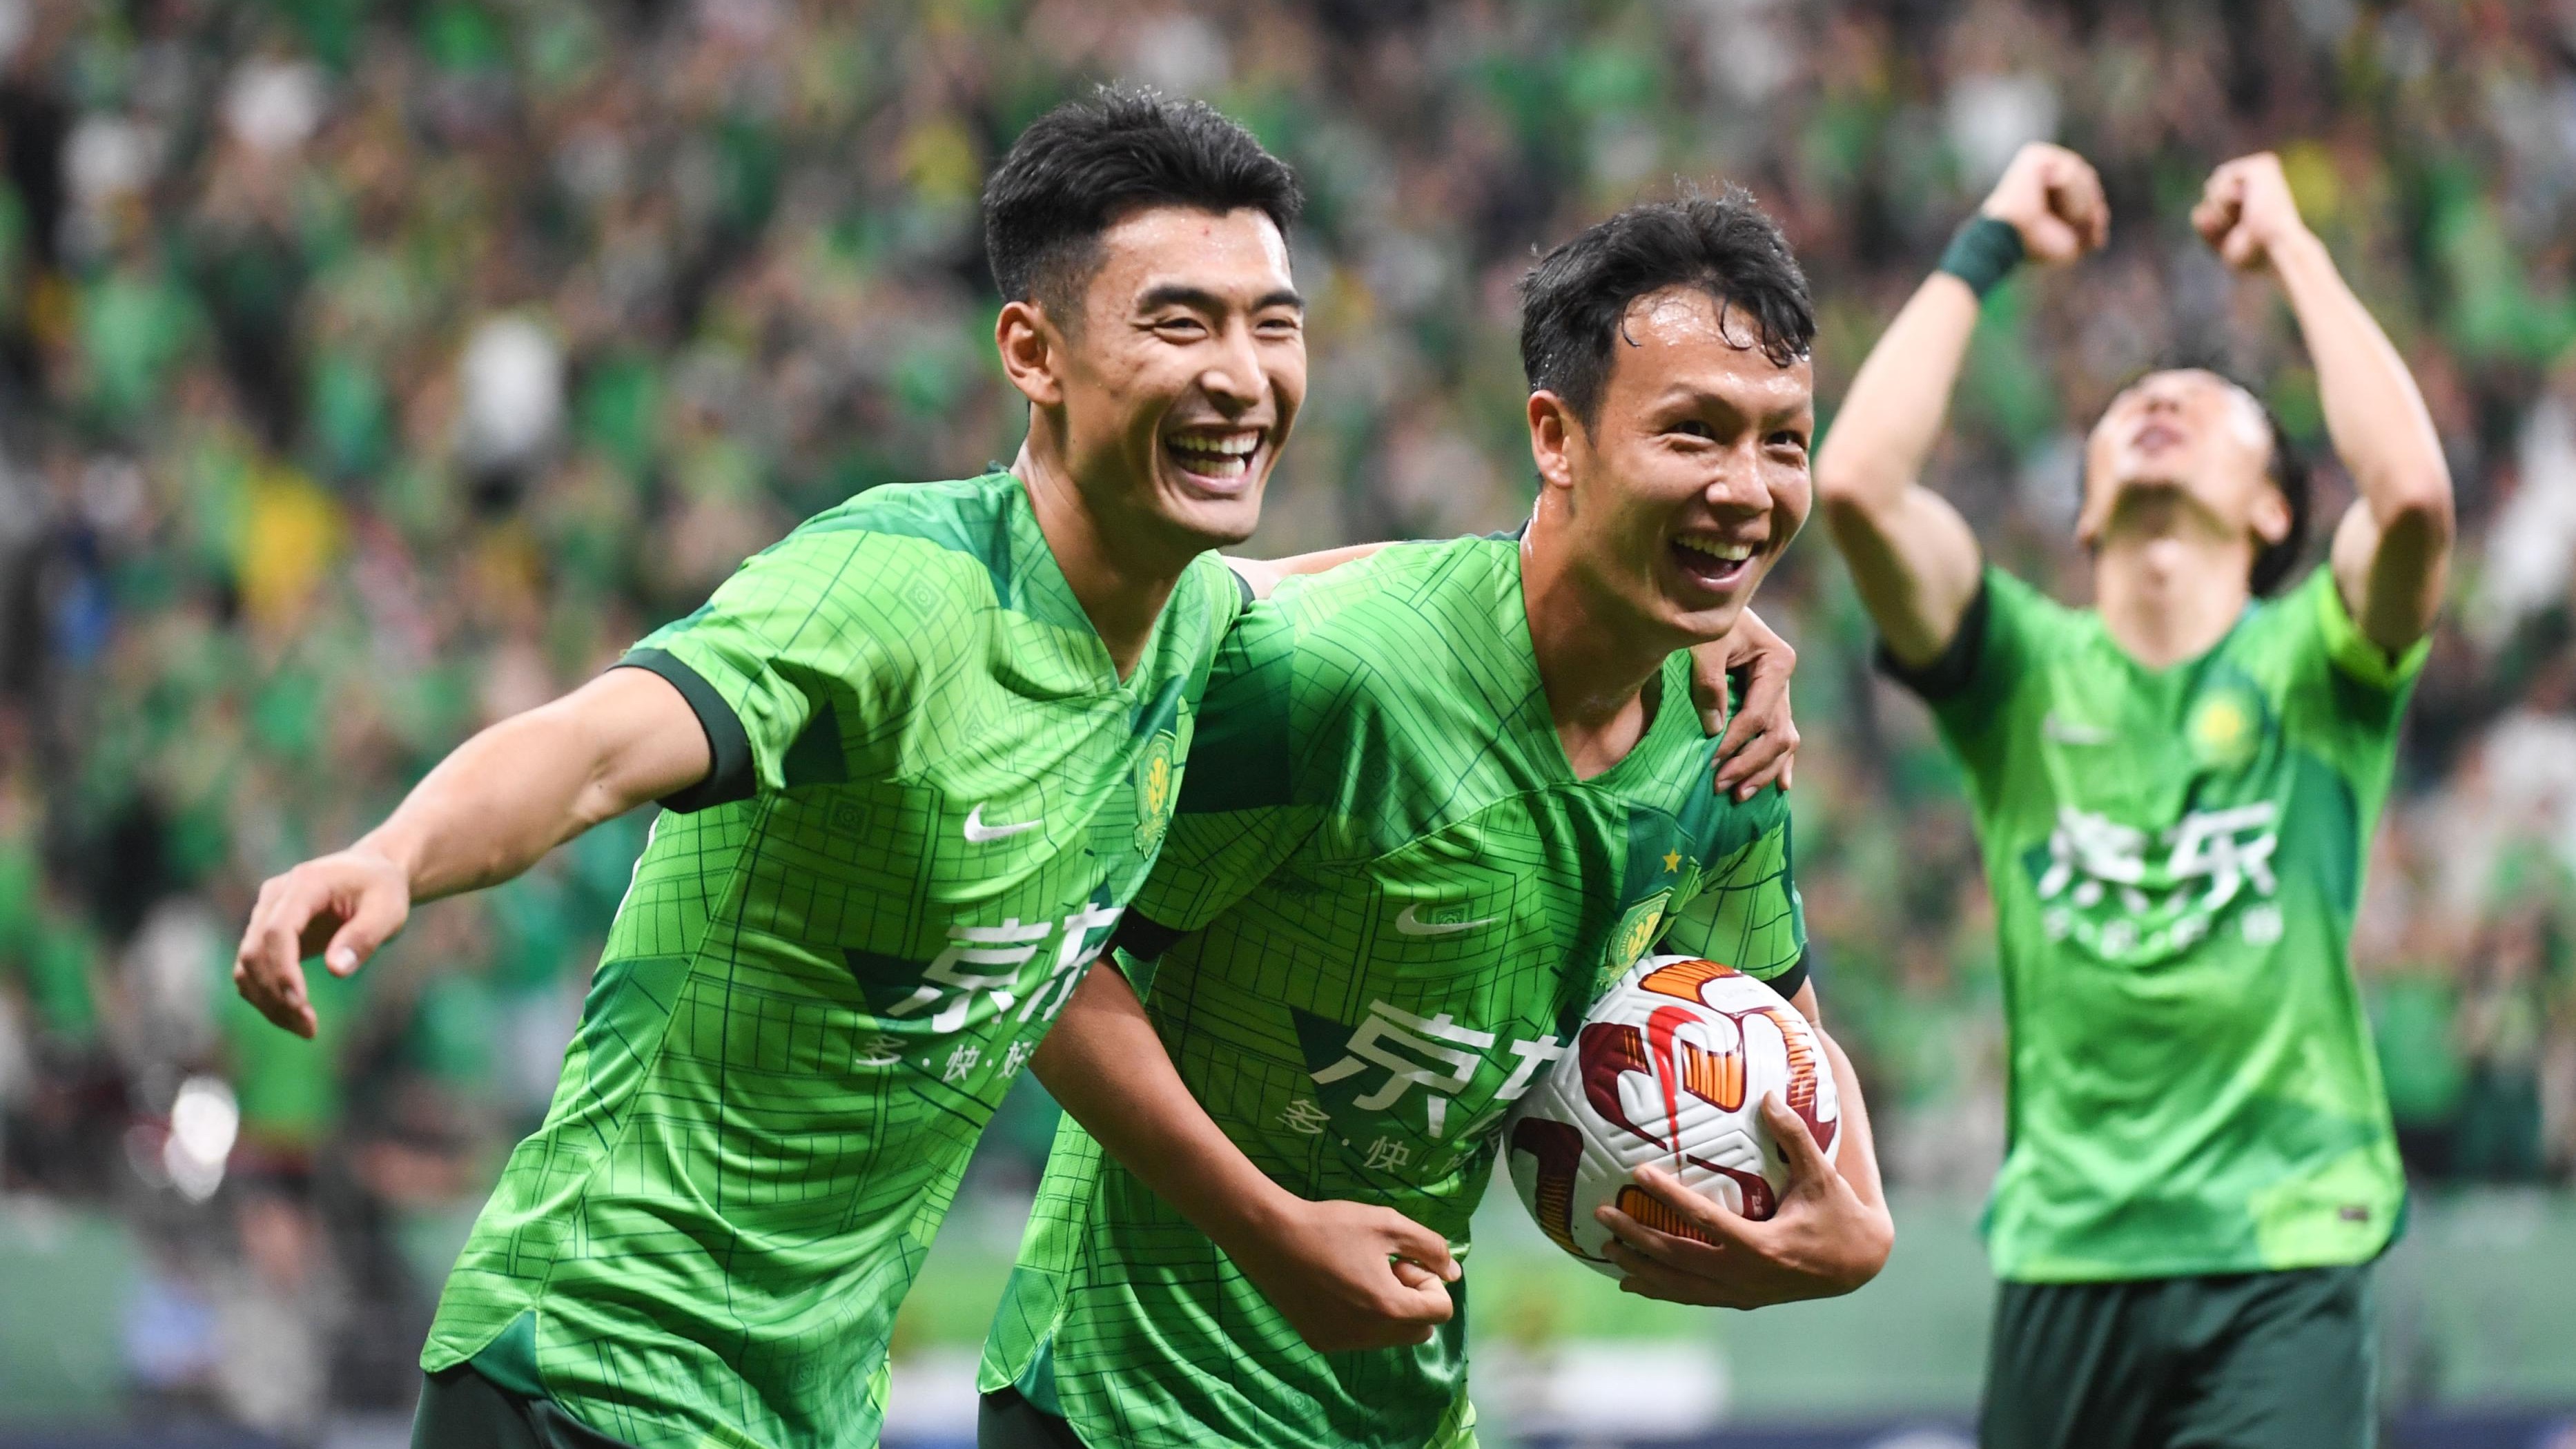 Beijing Guoan's Wang Ziming (L) and Gao Tianyi celebrate during their Chinese Super League clash with Cangzhou Mighty Lions at the new Workers' Stadium in Beijing, China, May 23, 2023. /Beijing Guoan